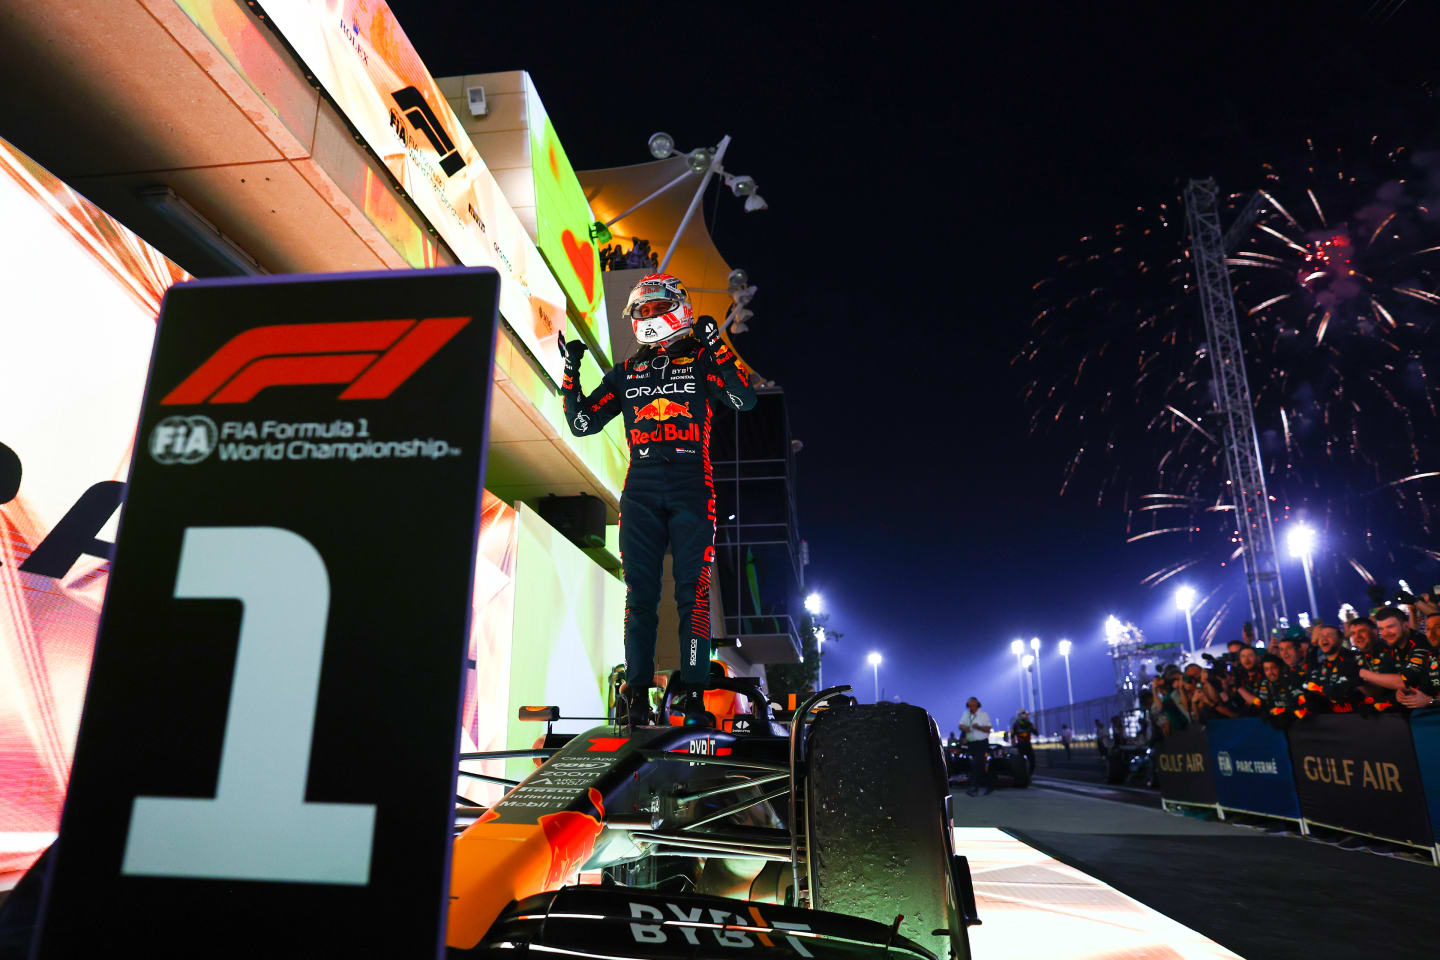 BAHRAIN, BAHRAIN - MARCH 05: Race winner Max Verstappen of the Netherlands and Oracle Red Bull Racing celebrates in parc ferme during the F1 Grand Prix of Bahrain at Bahrain International Circuit on March 05, 2023 in Bahrain, Bahrain. (Photo by Mark Thompson/Getty Images)